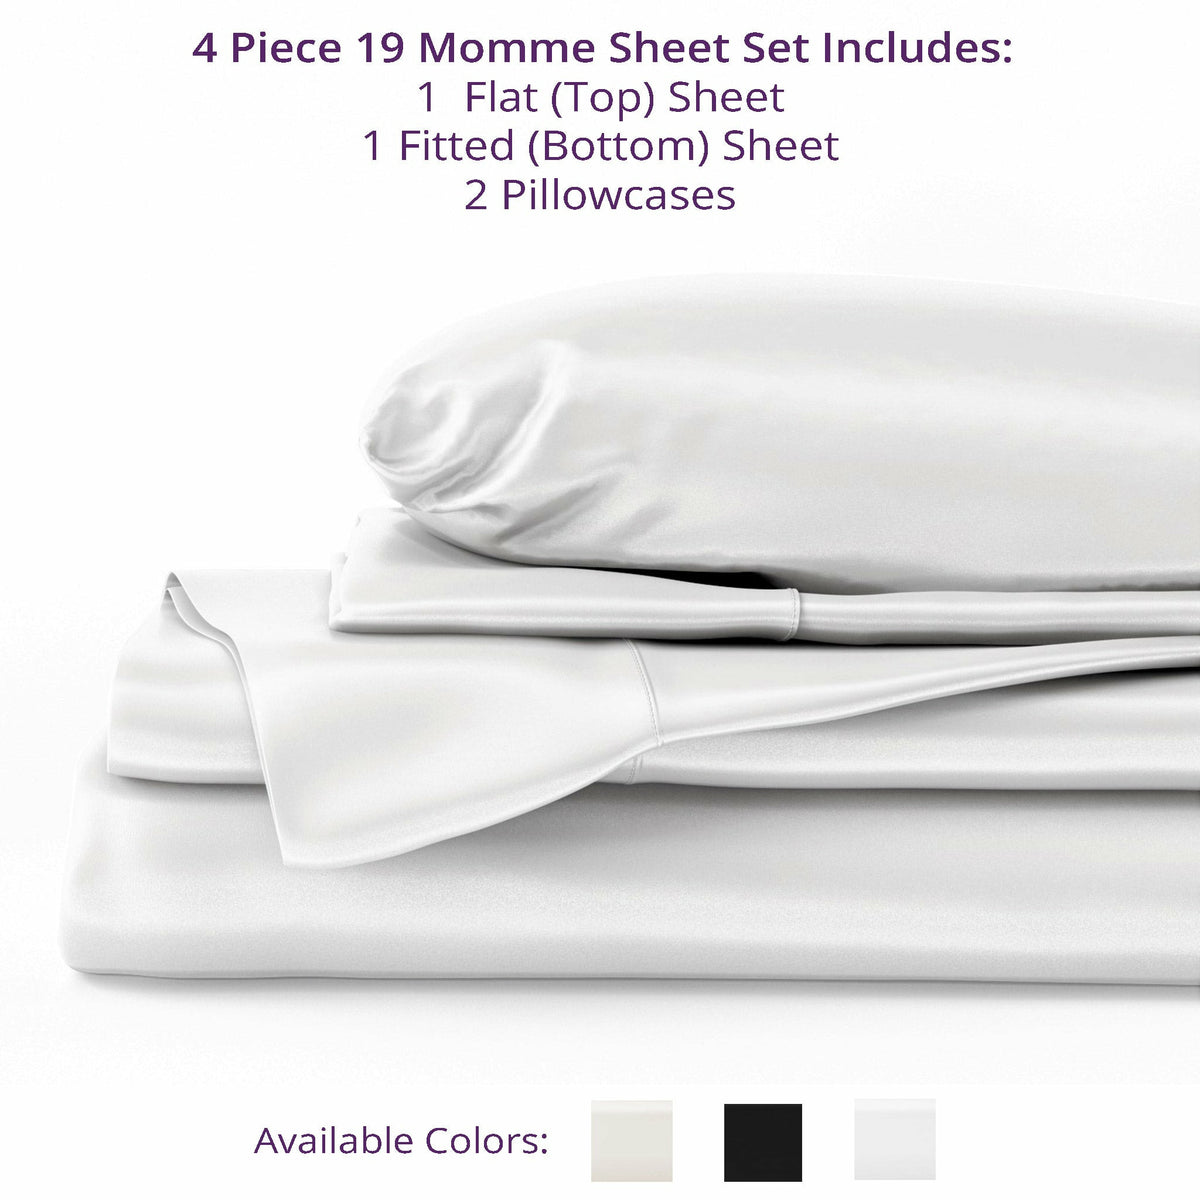 MPS Included in Sheet Set 19 Momme White Fine Linens